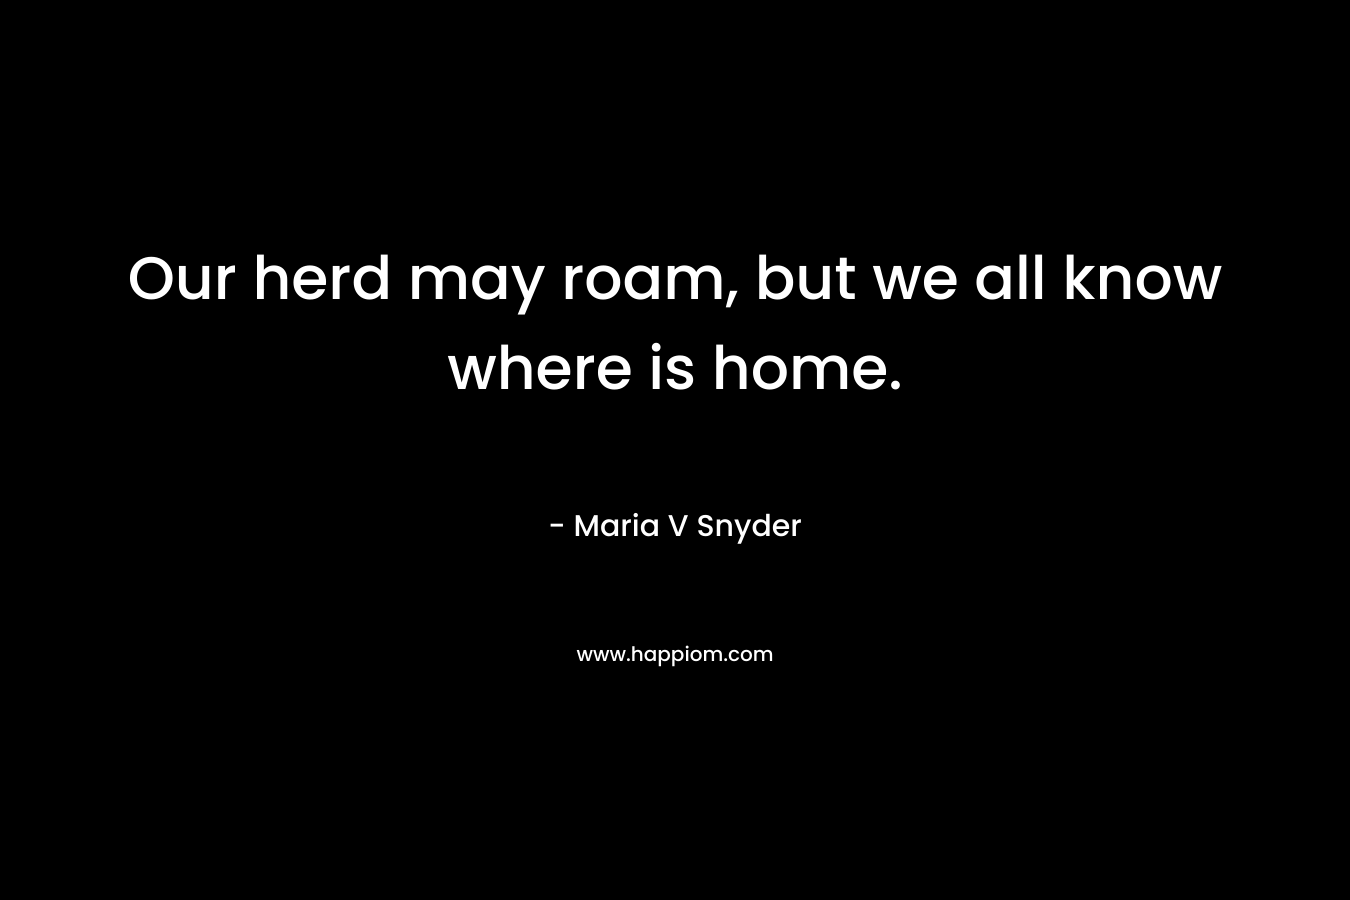 Our herd may roam, but we all know where is home. – Maria V Snyder